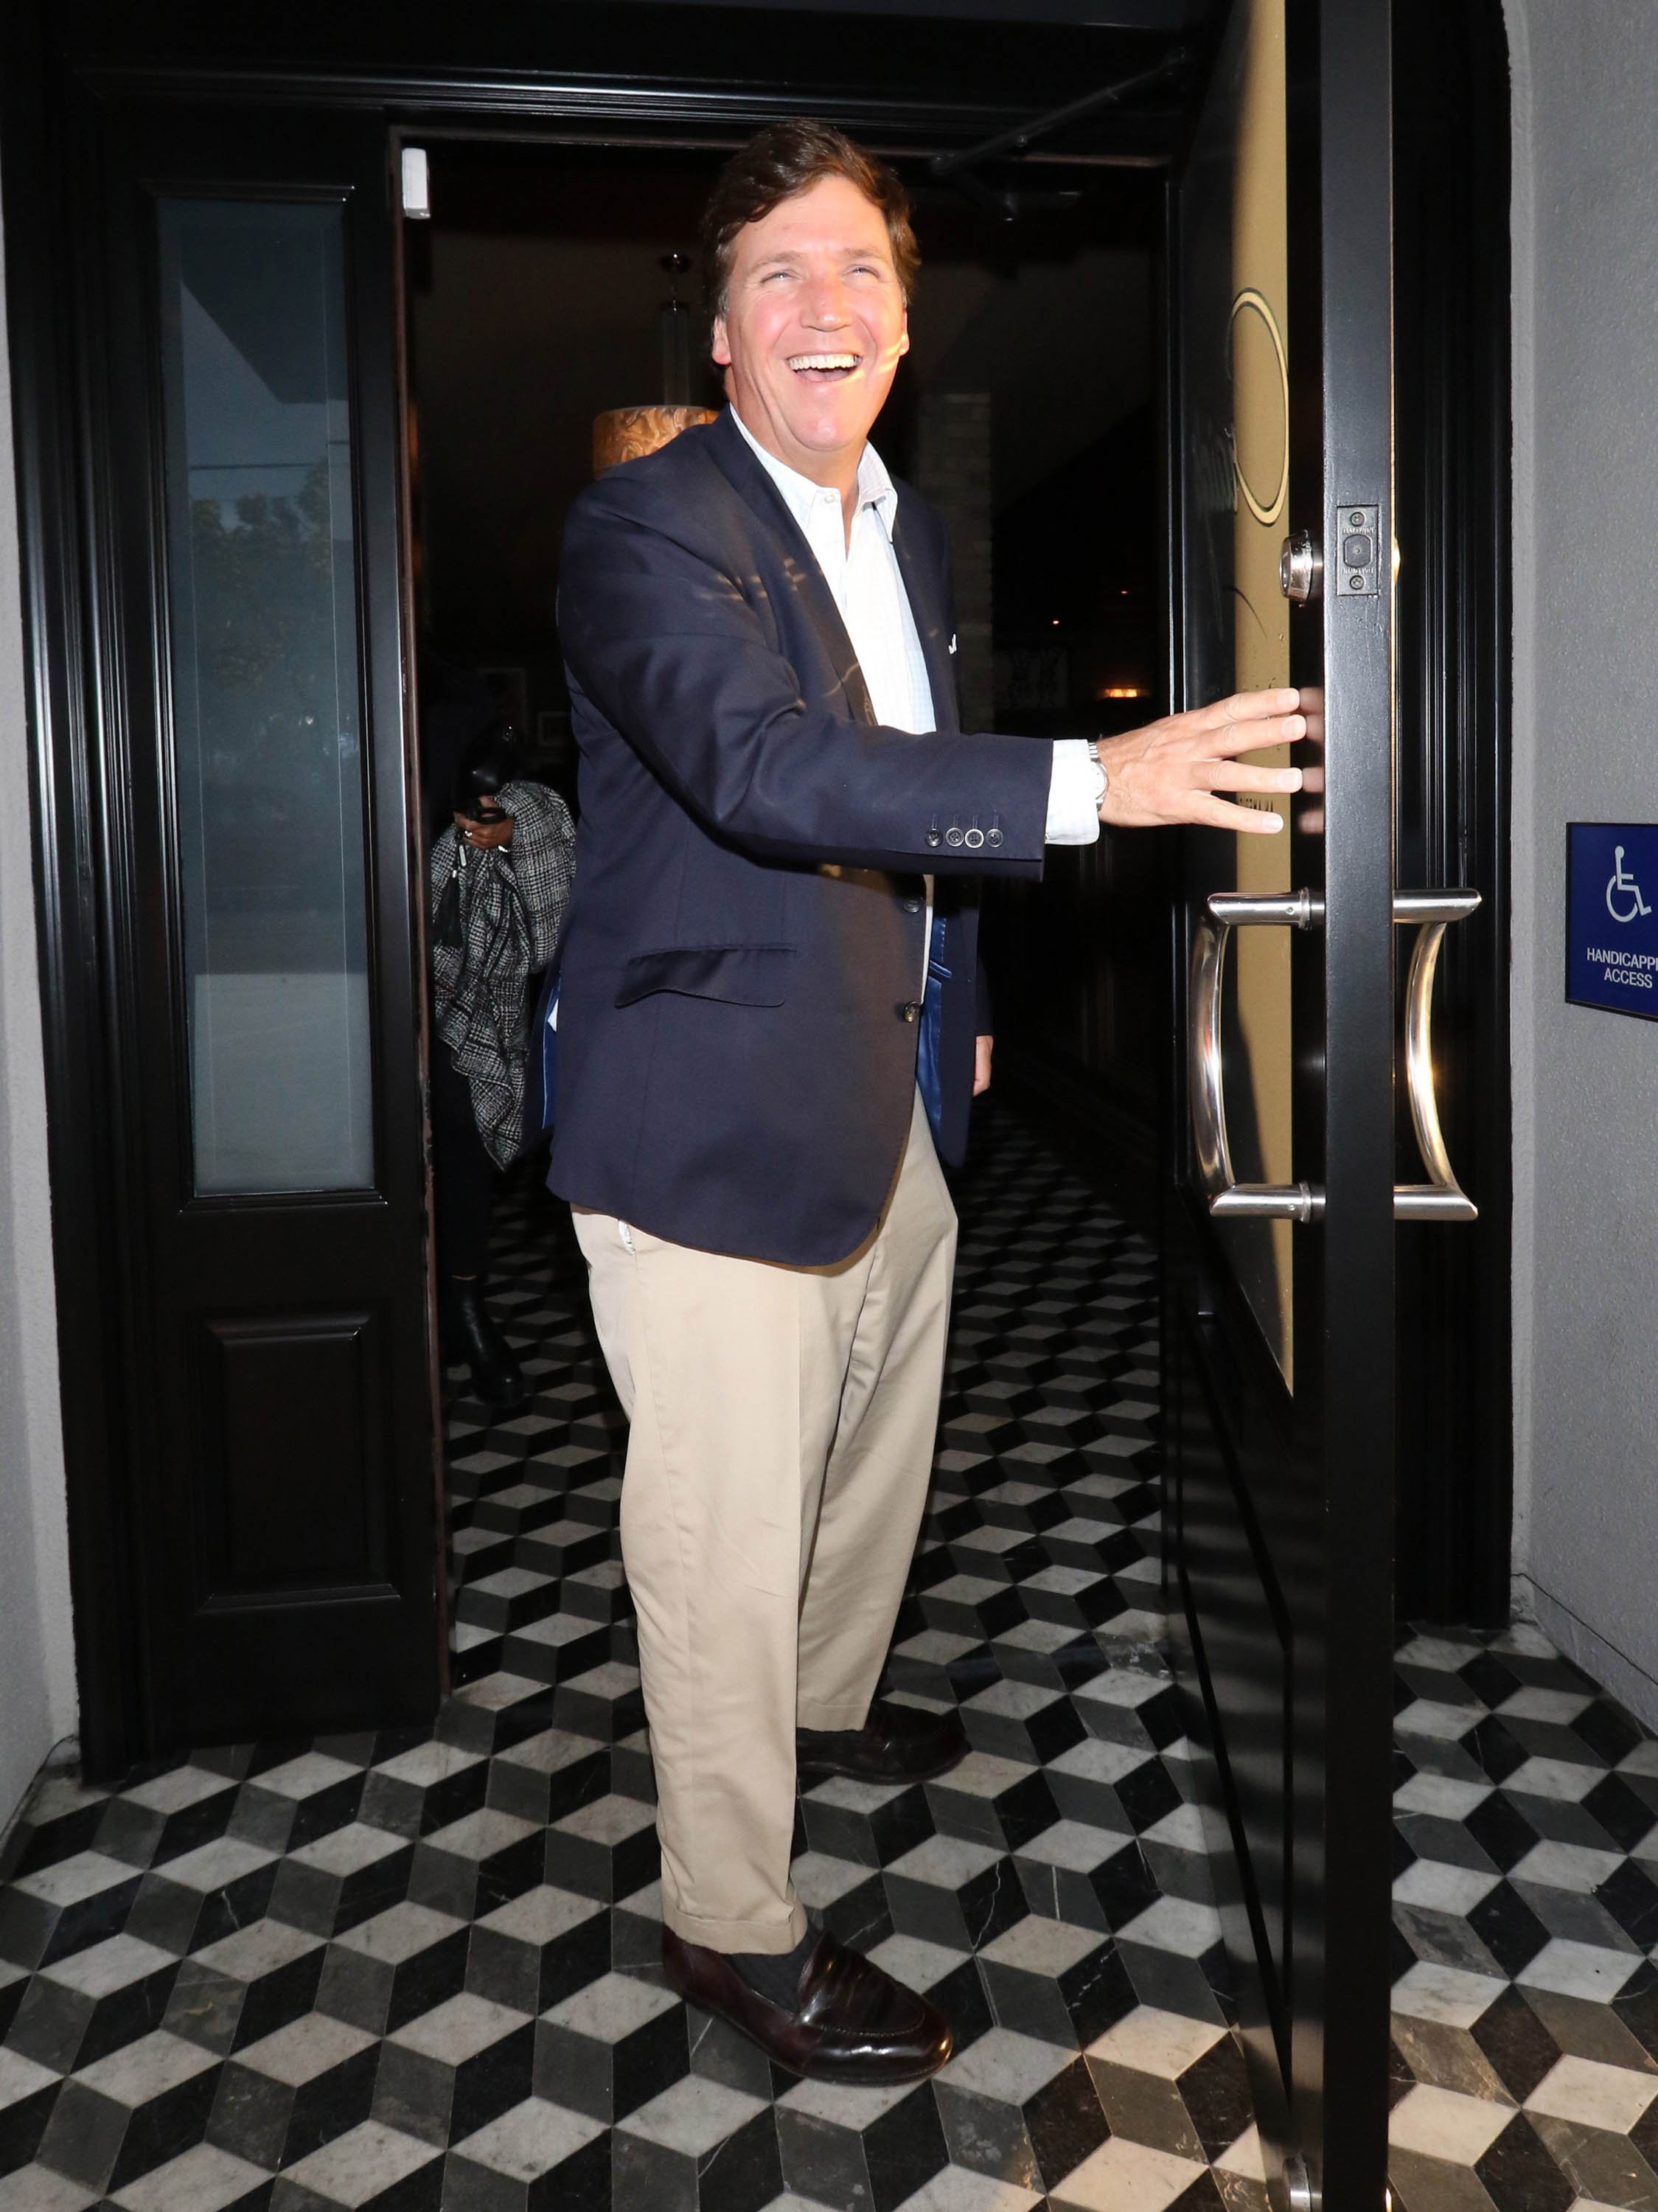 Tucker Carlson is seen on April 16, 2019, in Los Angeles, California | Source: Getty Images